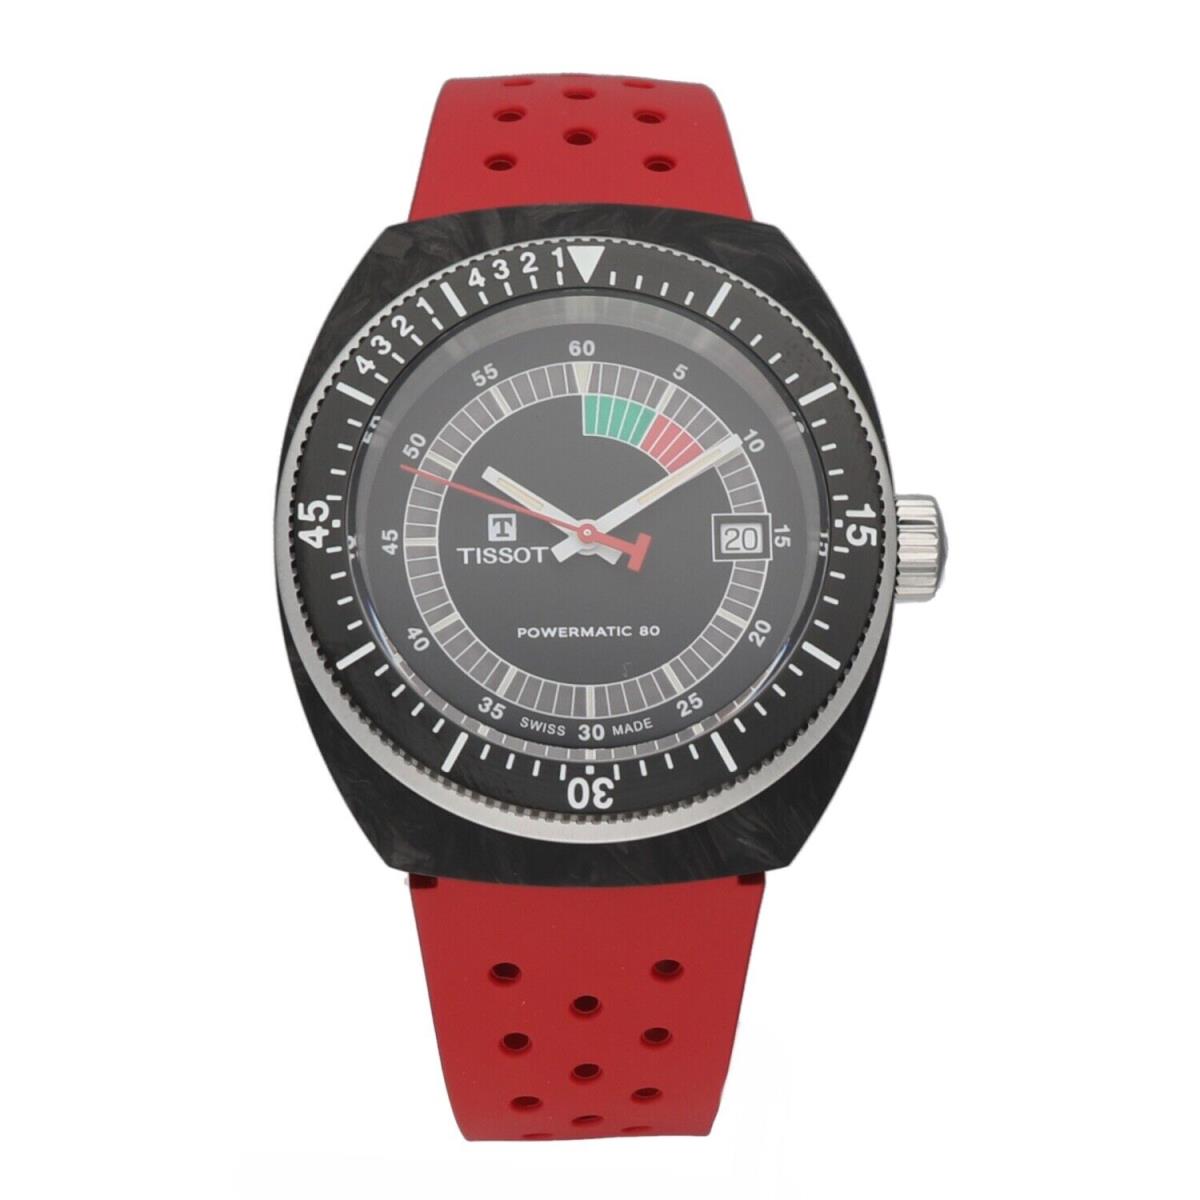 Tissot T145.407.97.057.02 Sideral S Powermatic 80 41 mm Red Rubber Wrist Watch - Dial: Black, Band: Red, Bezel: Black